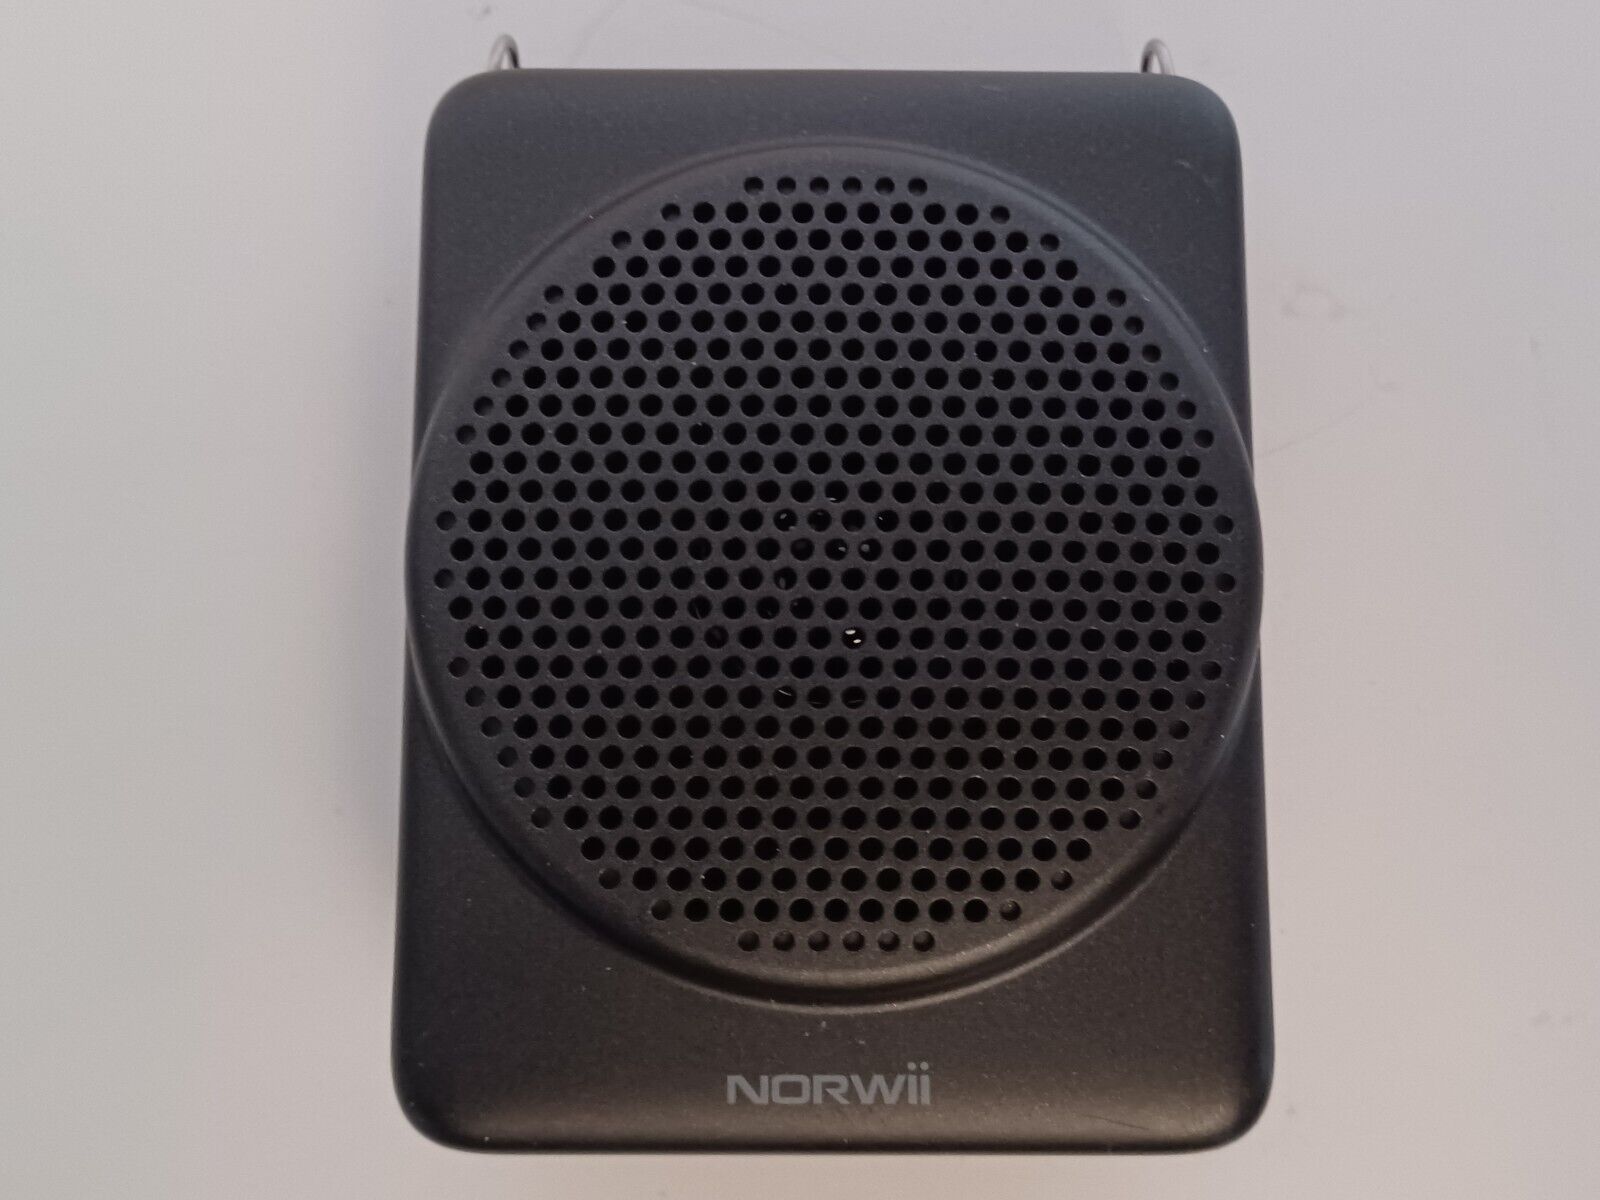 Norwii S368 Black Portable Rechargeable Voice Amplifier -No Microphone/Cords